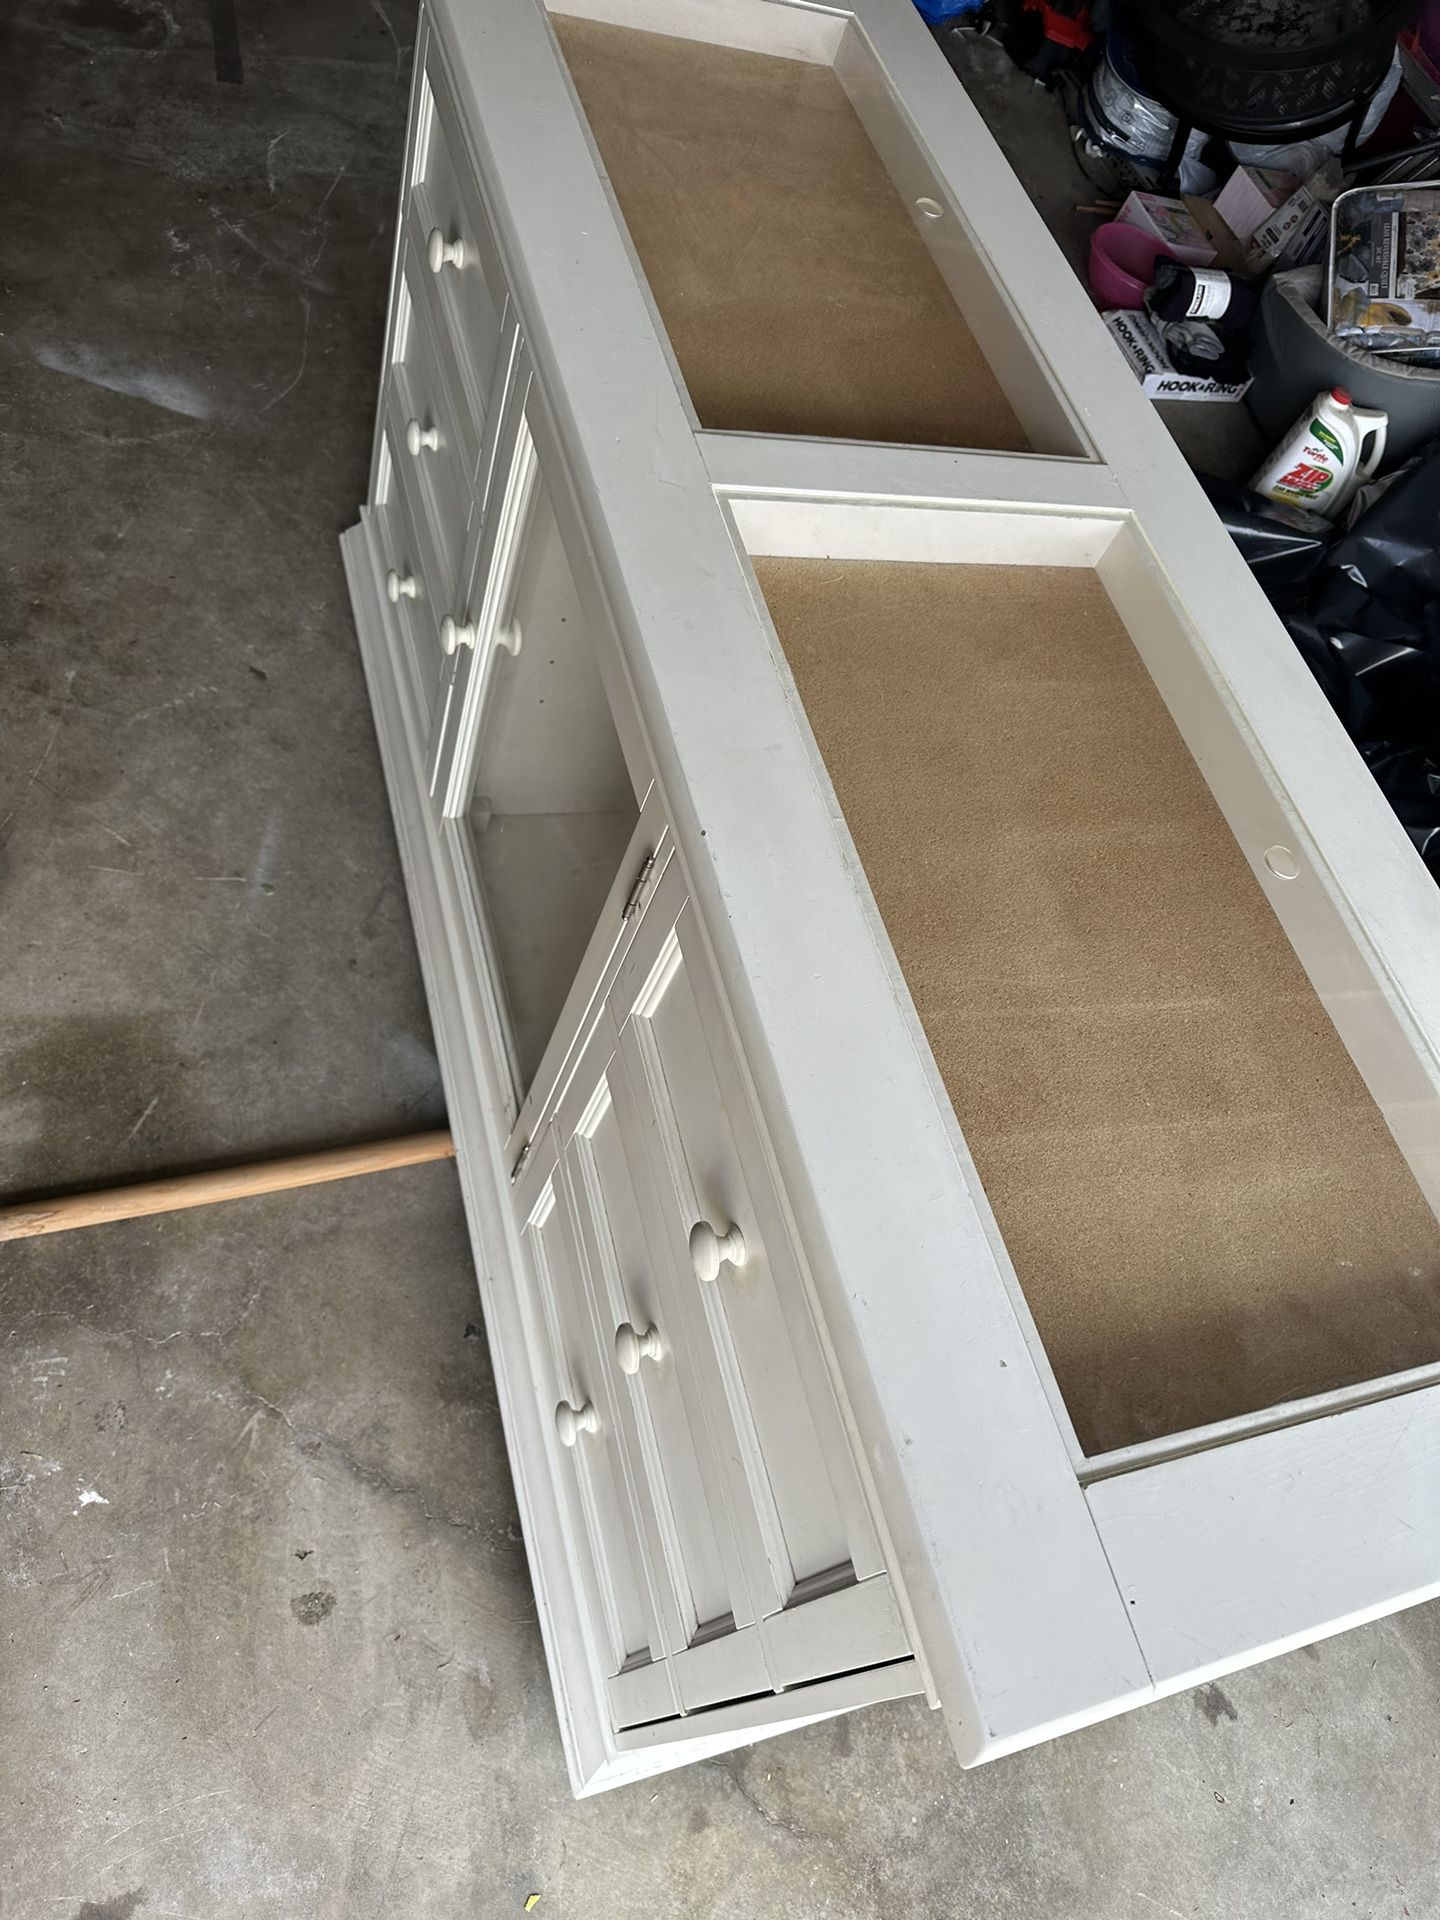 Pottery Barn White Dresser With Shadow Box